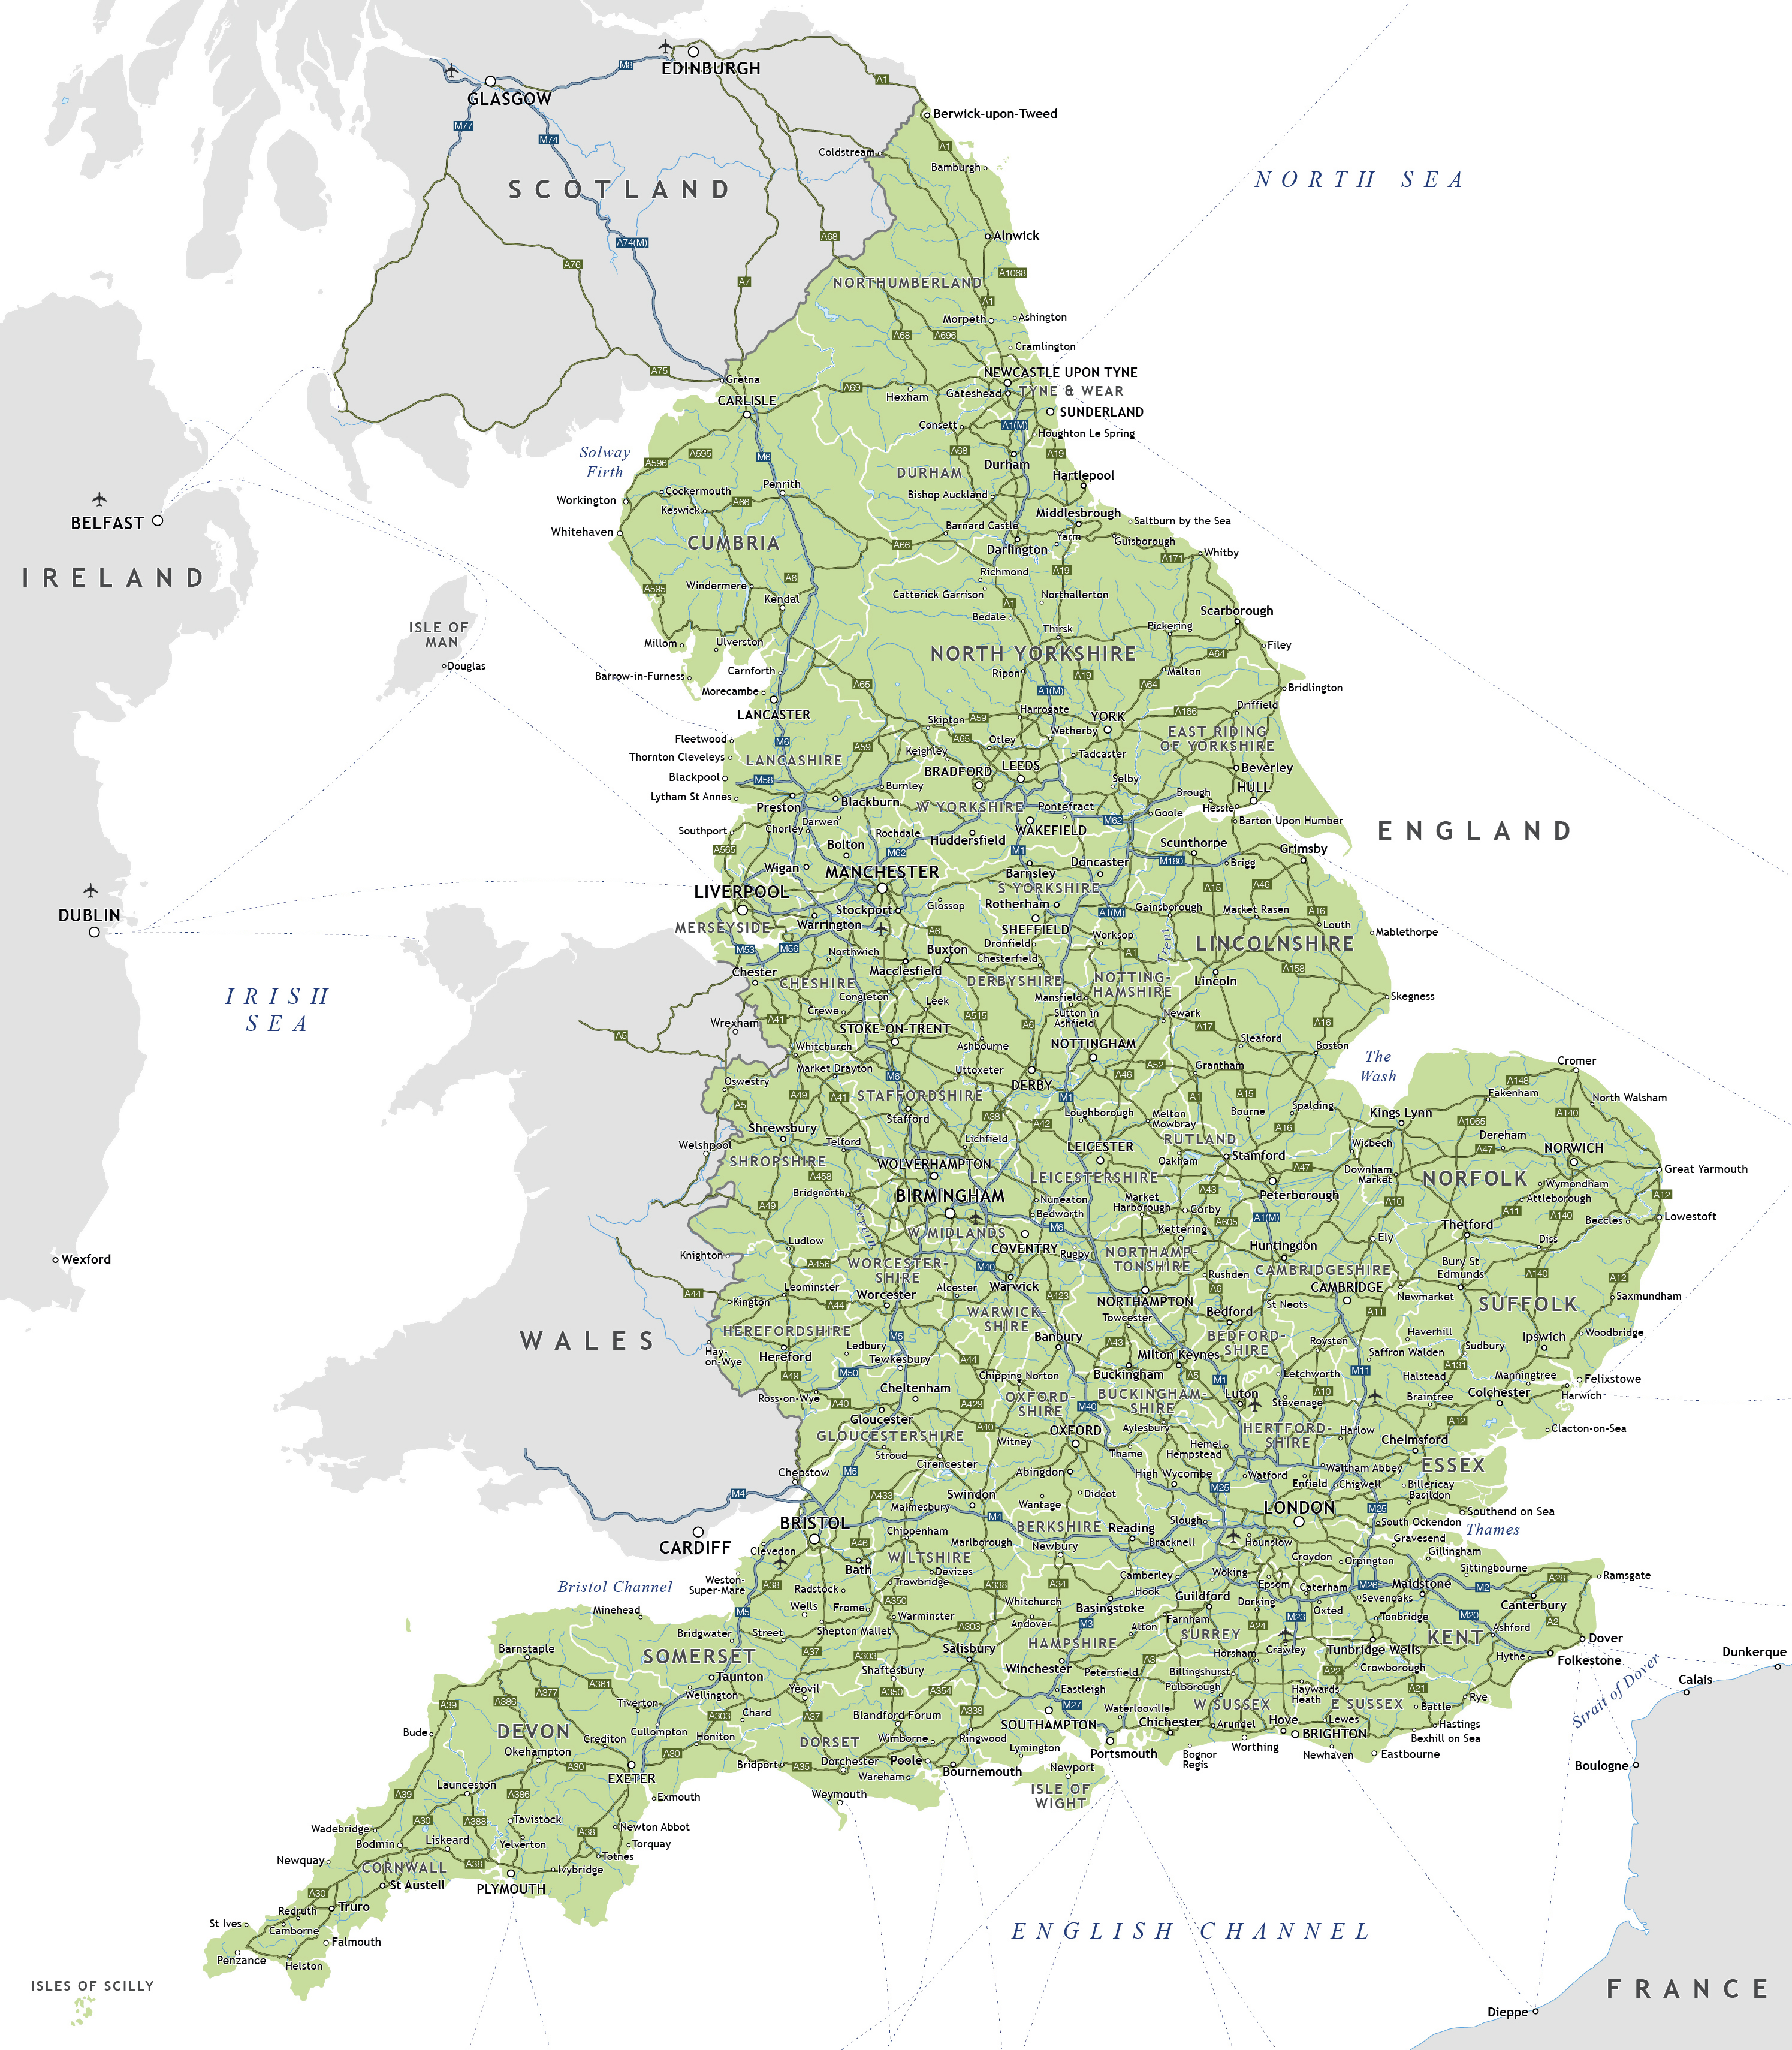 Large Detailed Highways Map Of England With Cities England